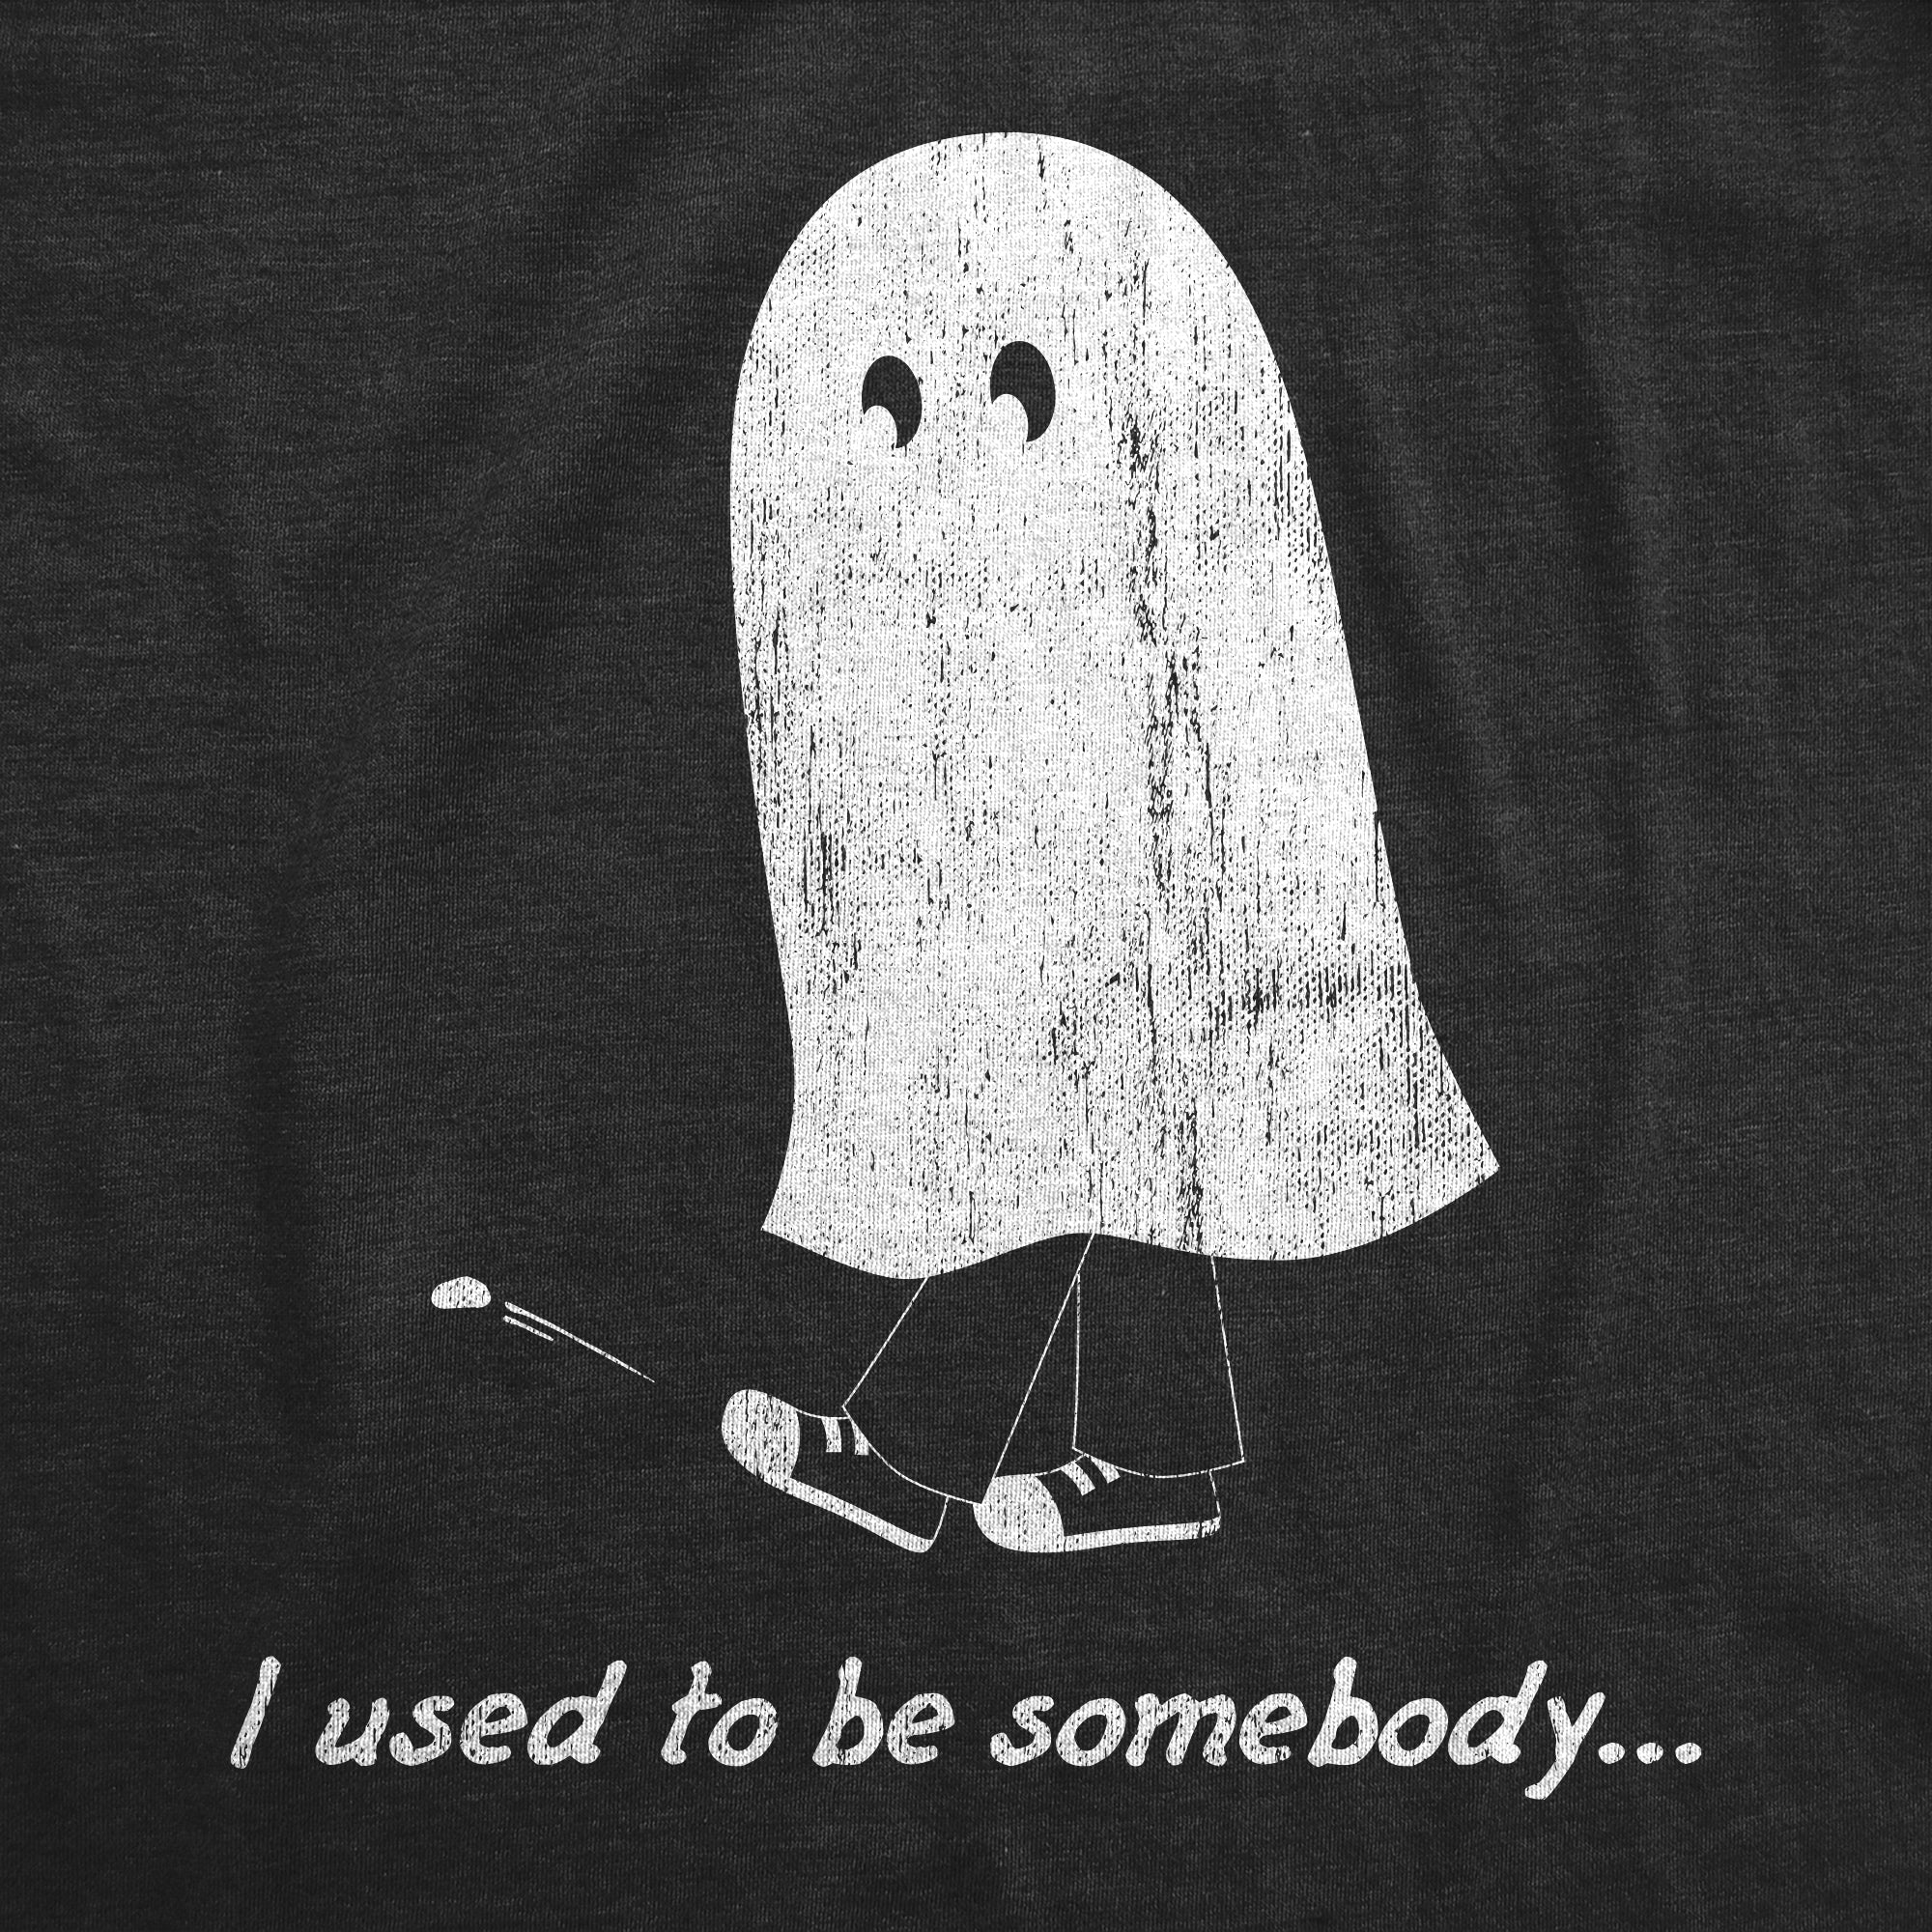 Funny Heather Black - SOMEBODY I Used To Be Somebody Mens T Shirt Nerdy Halloween Sarcastic Tee